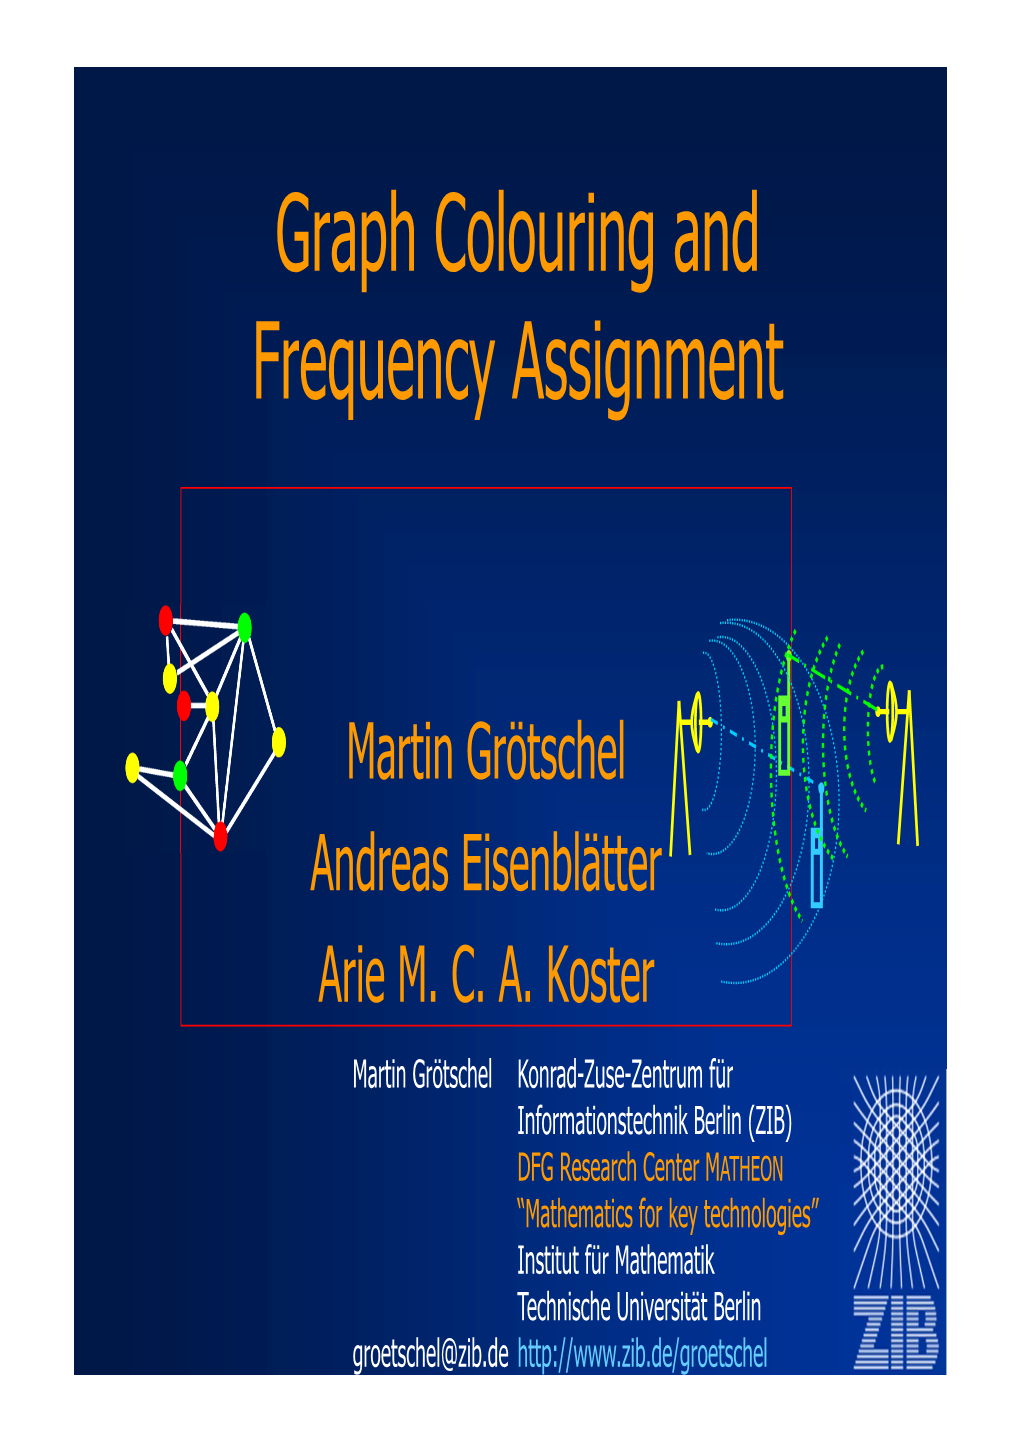 Graph Colouring and Frequency Assignment